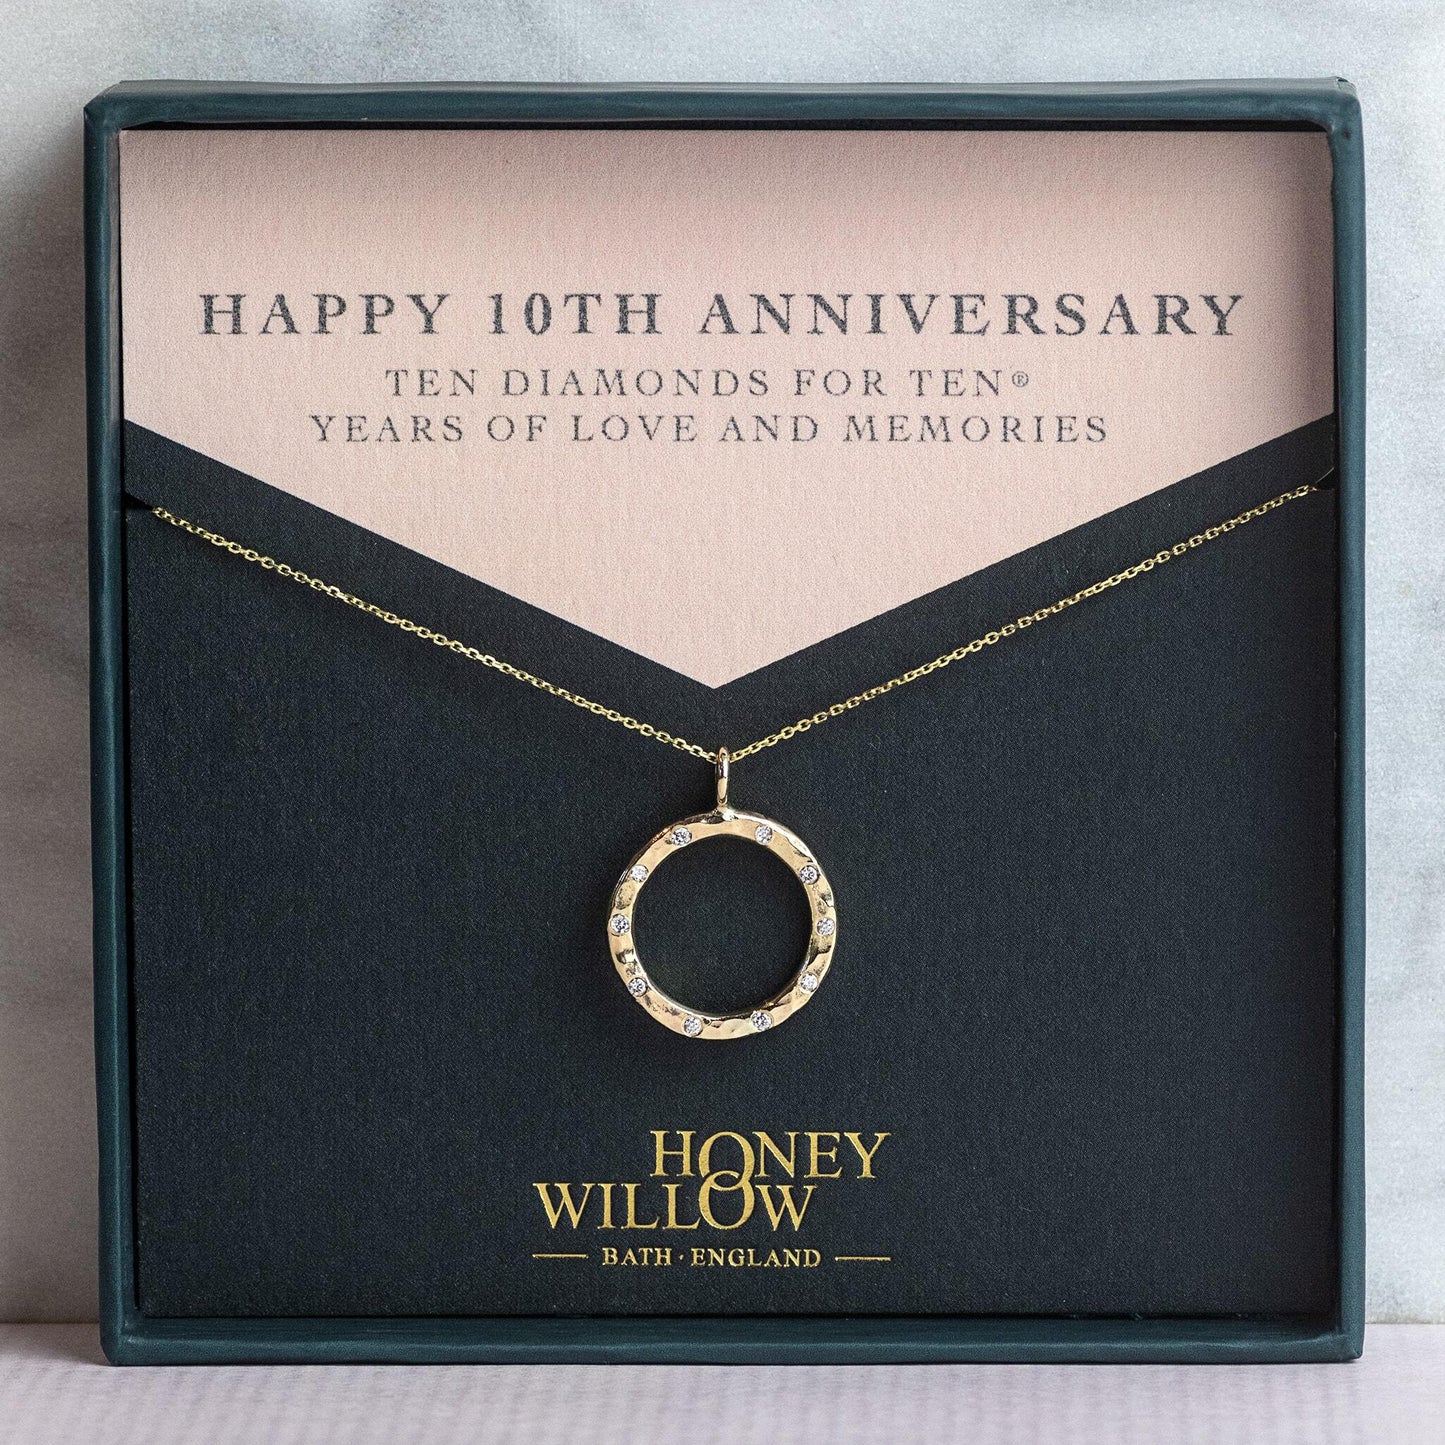 10th Anniversary Gift - 9kt Gold Diamond Halo Necklace - 10 Diamonds for 10® Years